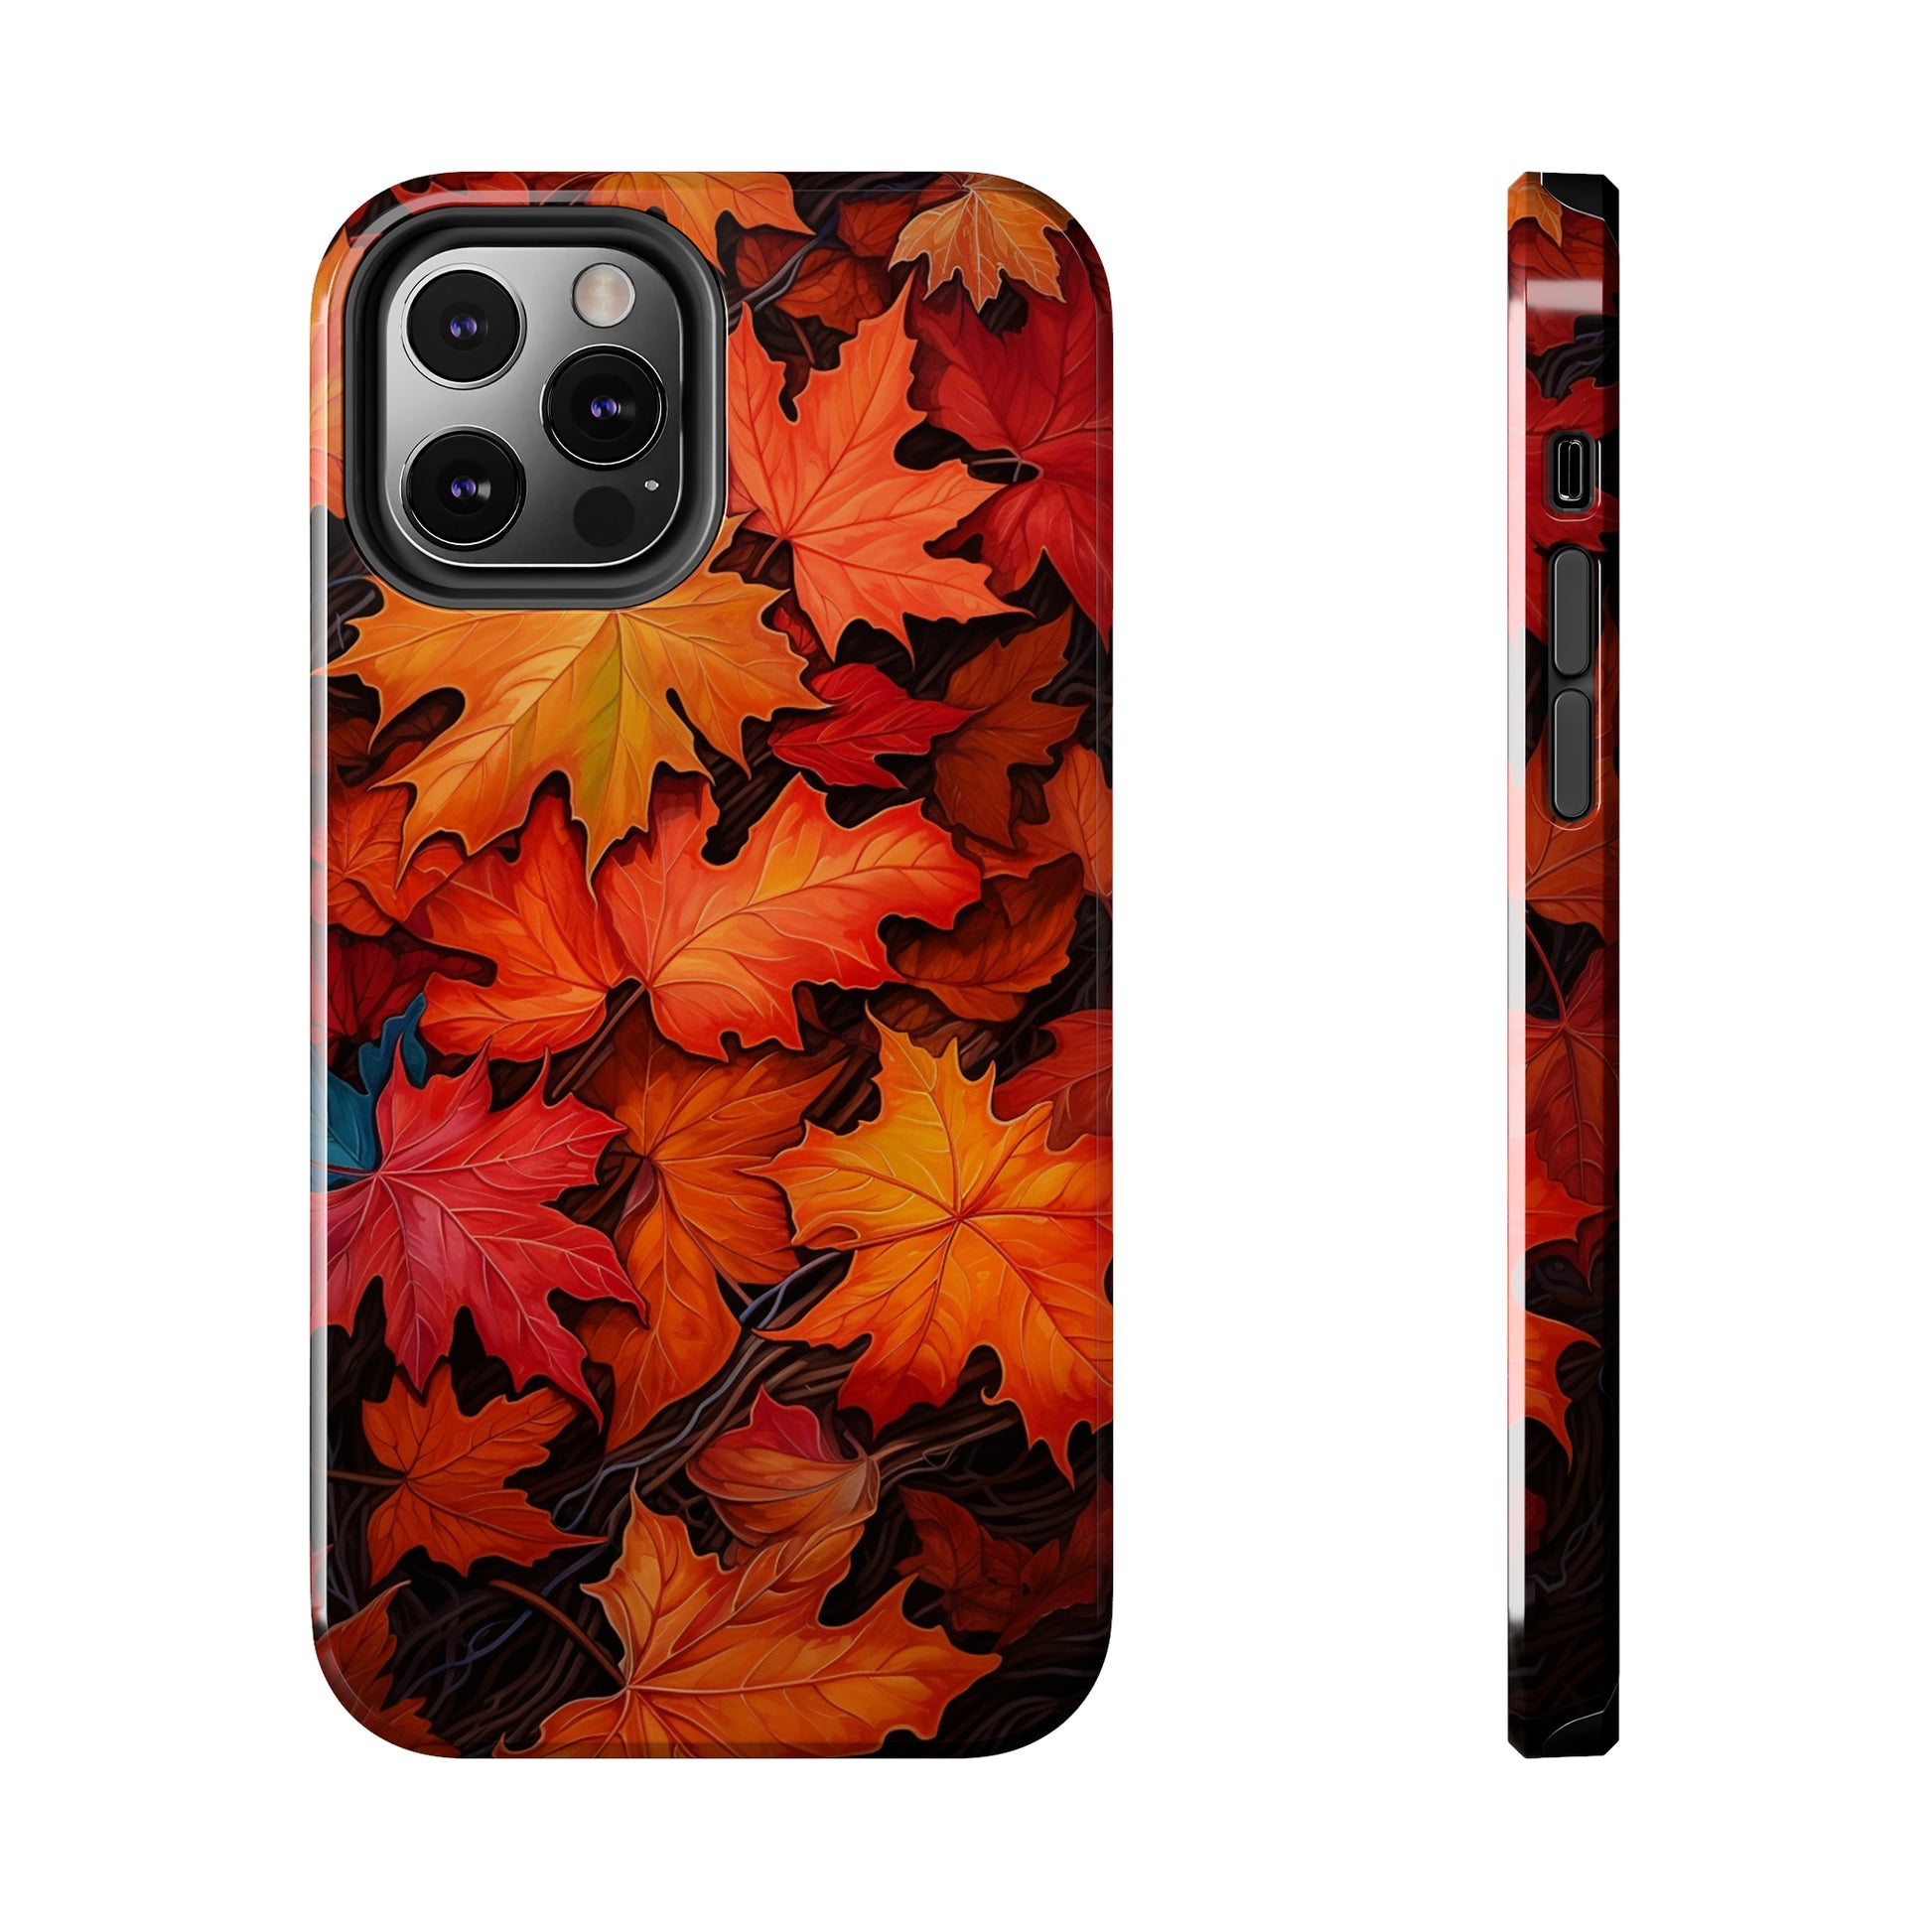 Fall colors phone case